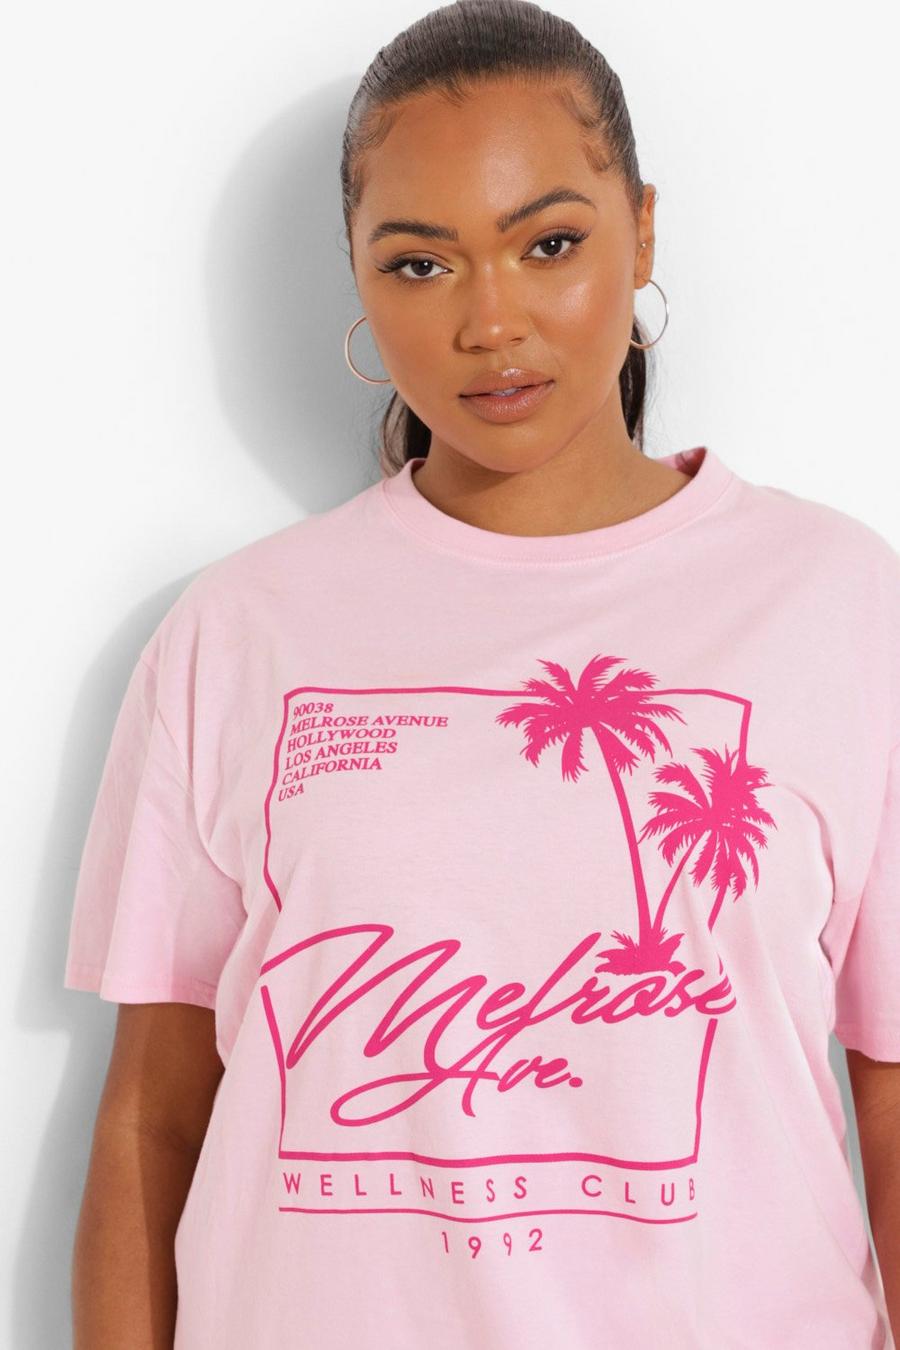 Plus Melrose Ave T-Shirt, Baby pink image number 1